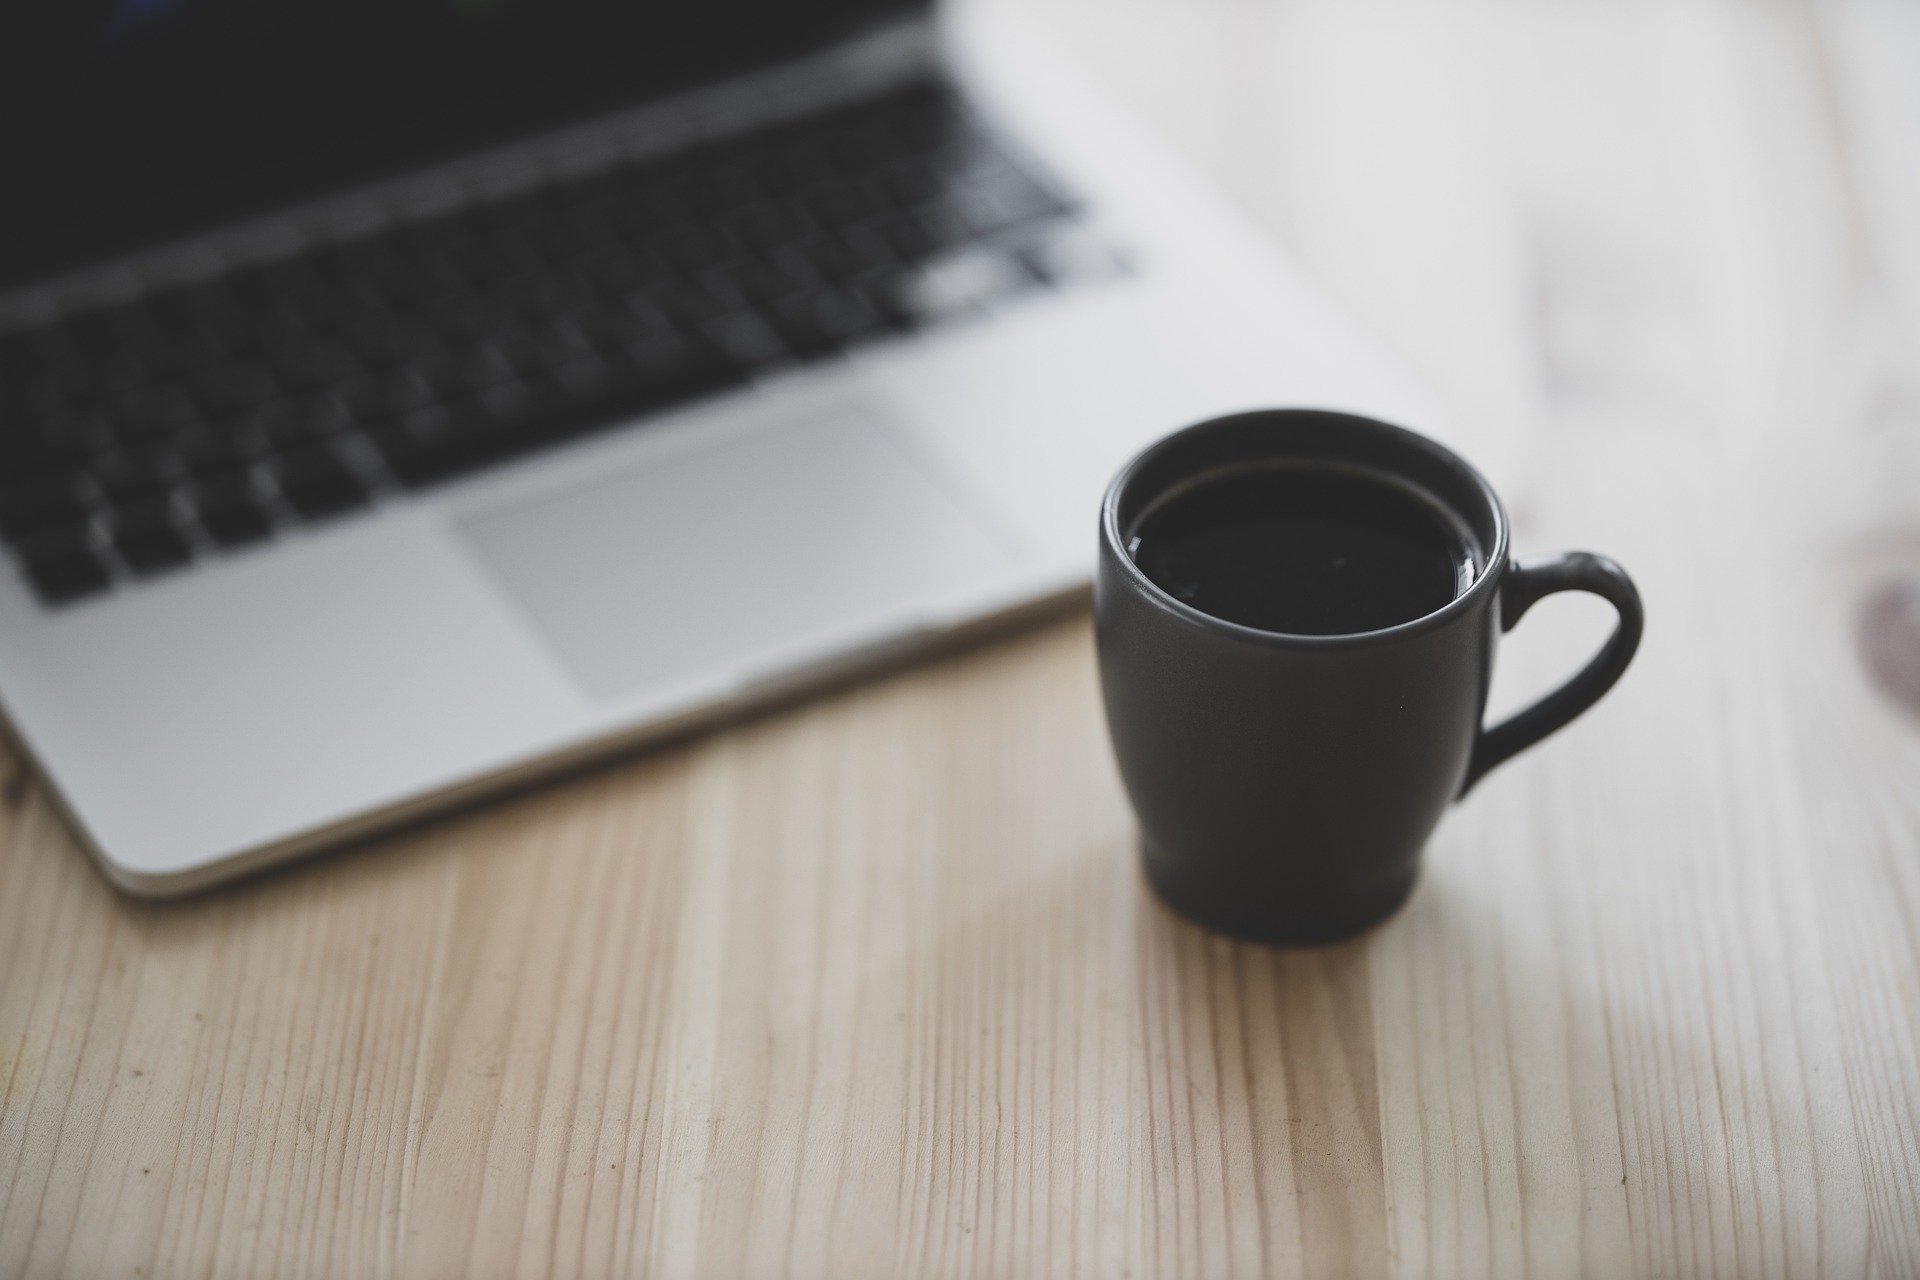 decorate image of a coffee mug and laptop on wooden desk; Image by Engin Akyurt from Pixabay